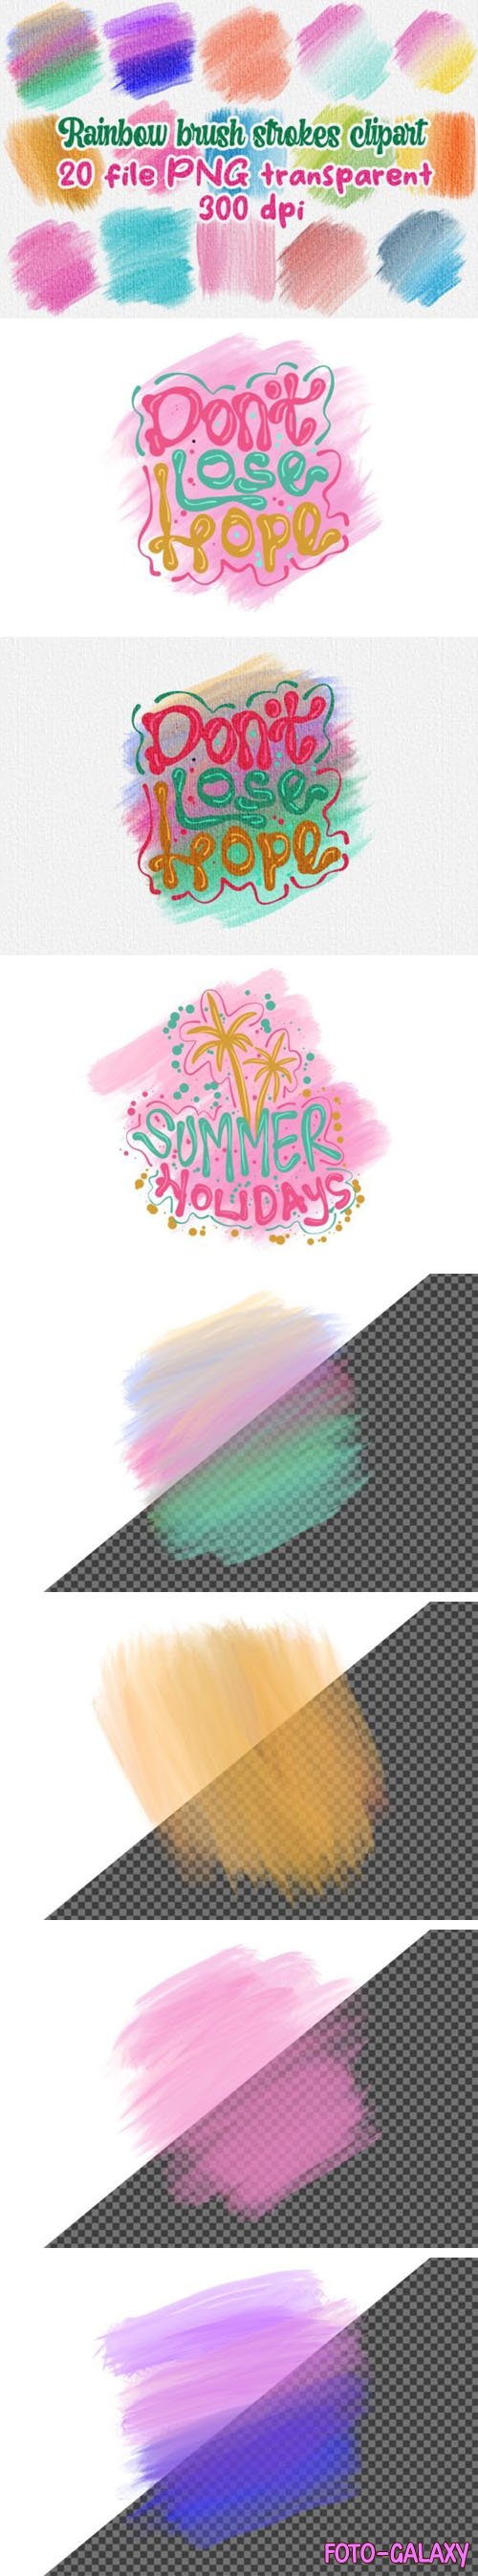 Rainbow Brush Strokes PNG Clipart